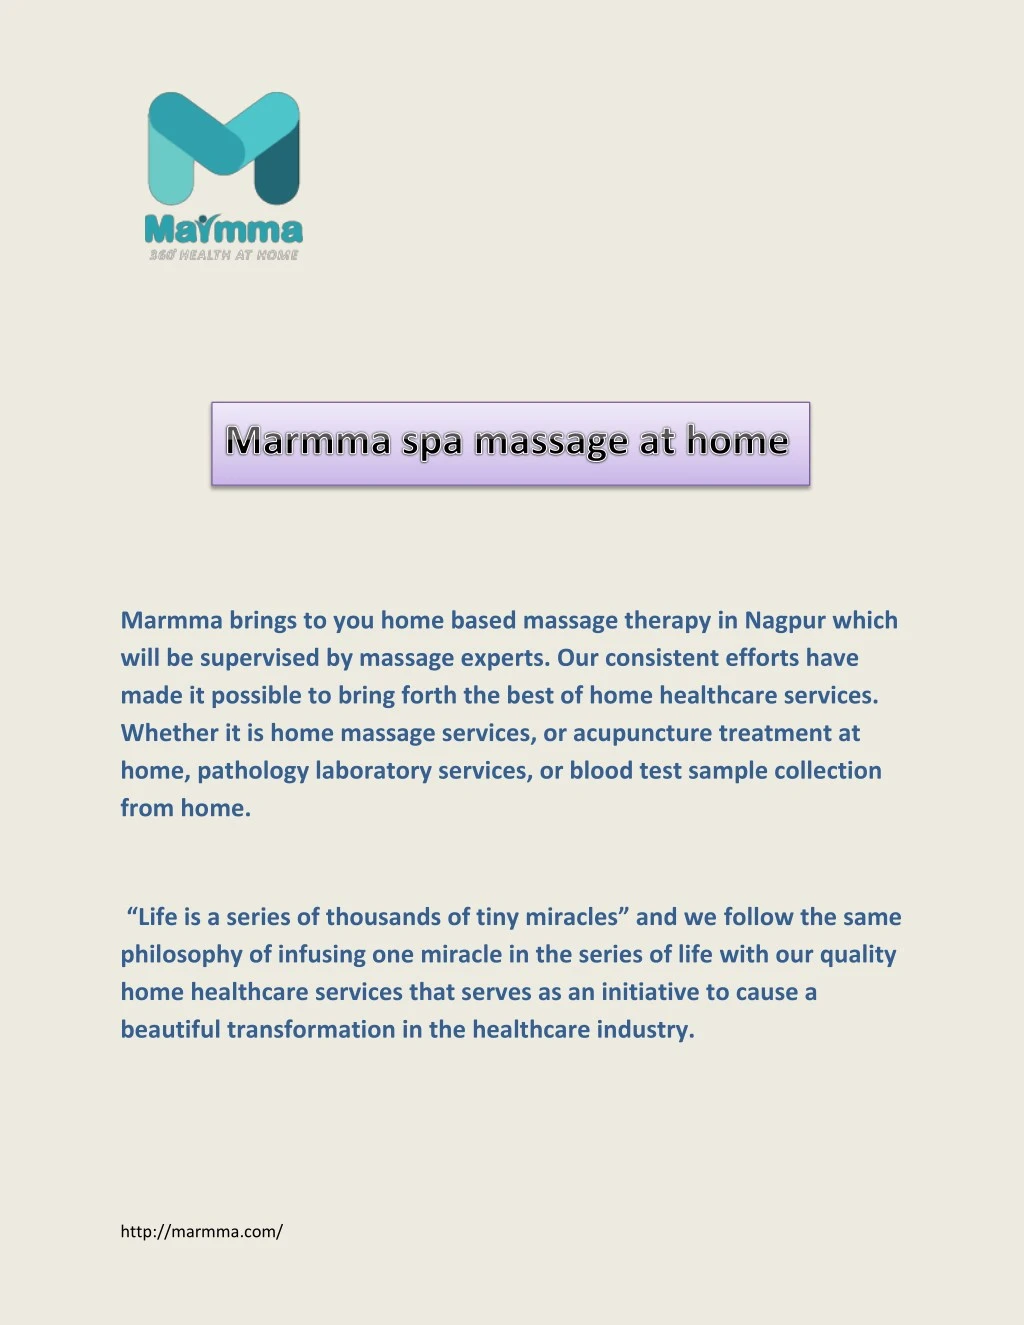 marmma brings to you home based massage therapy